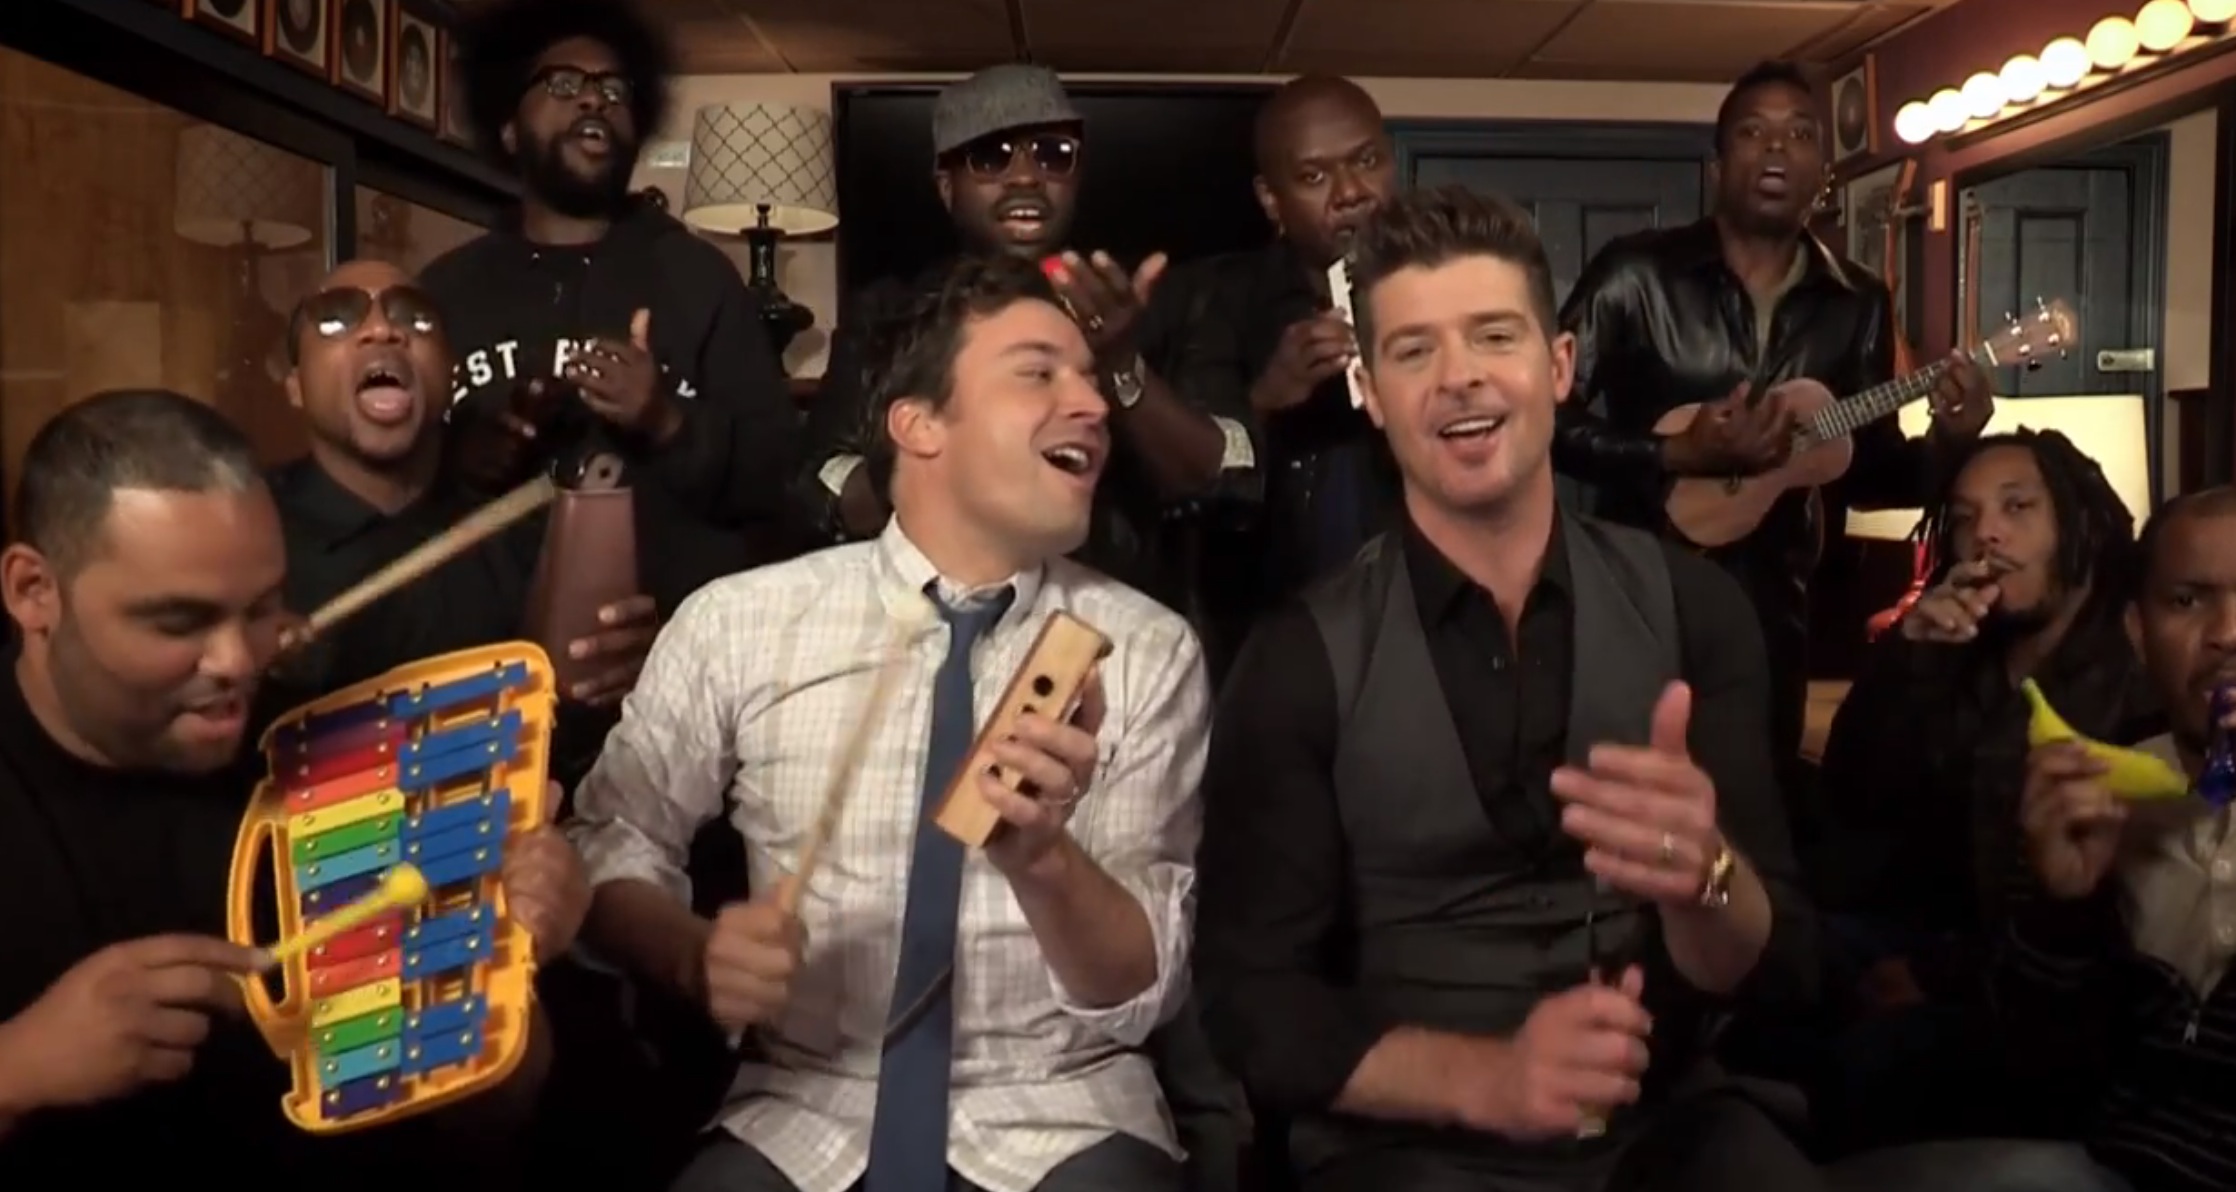 Jimmy Fallon Robin Thicke The Roots Blurred Lines